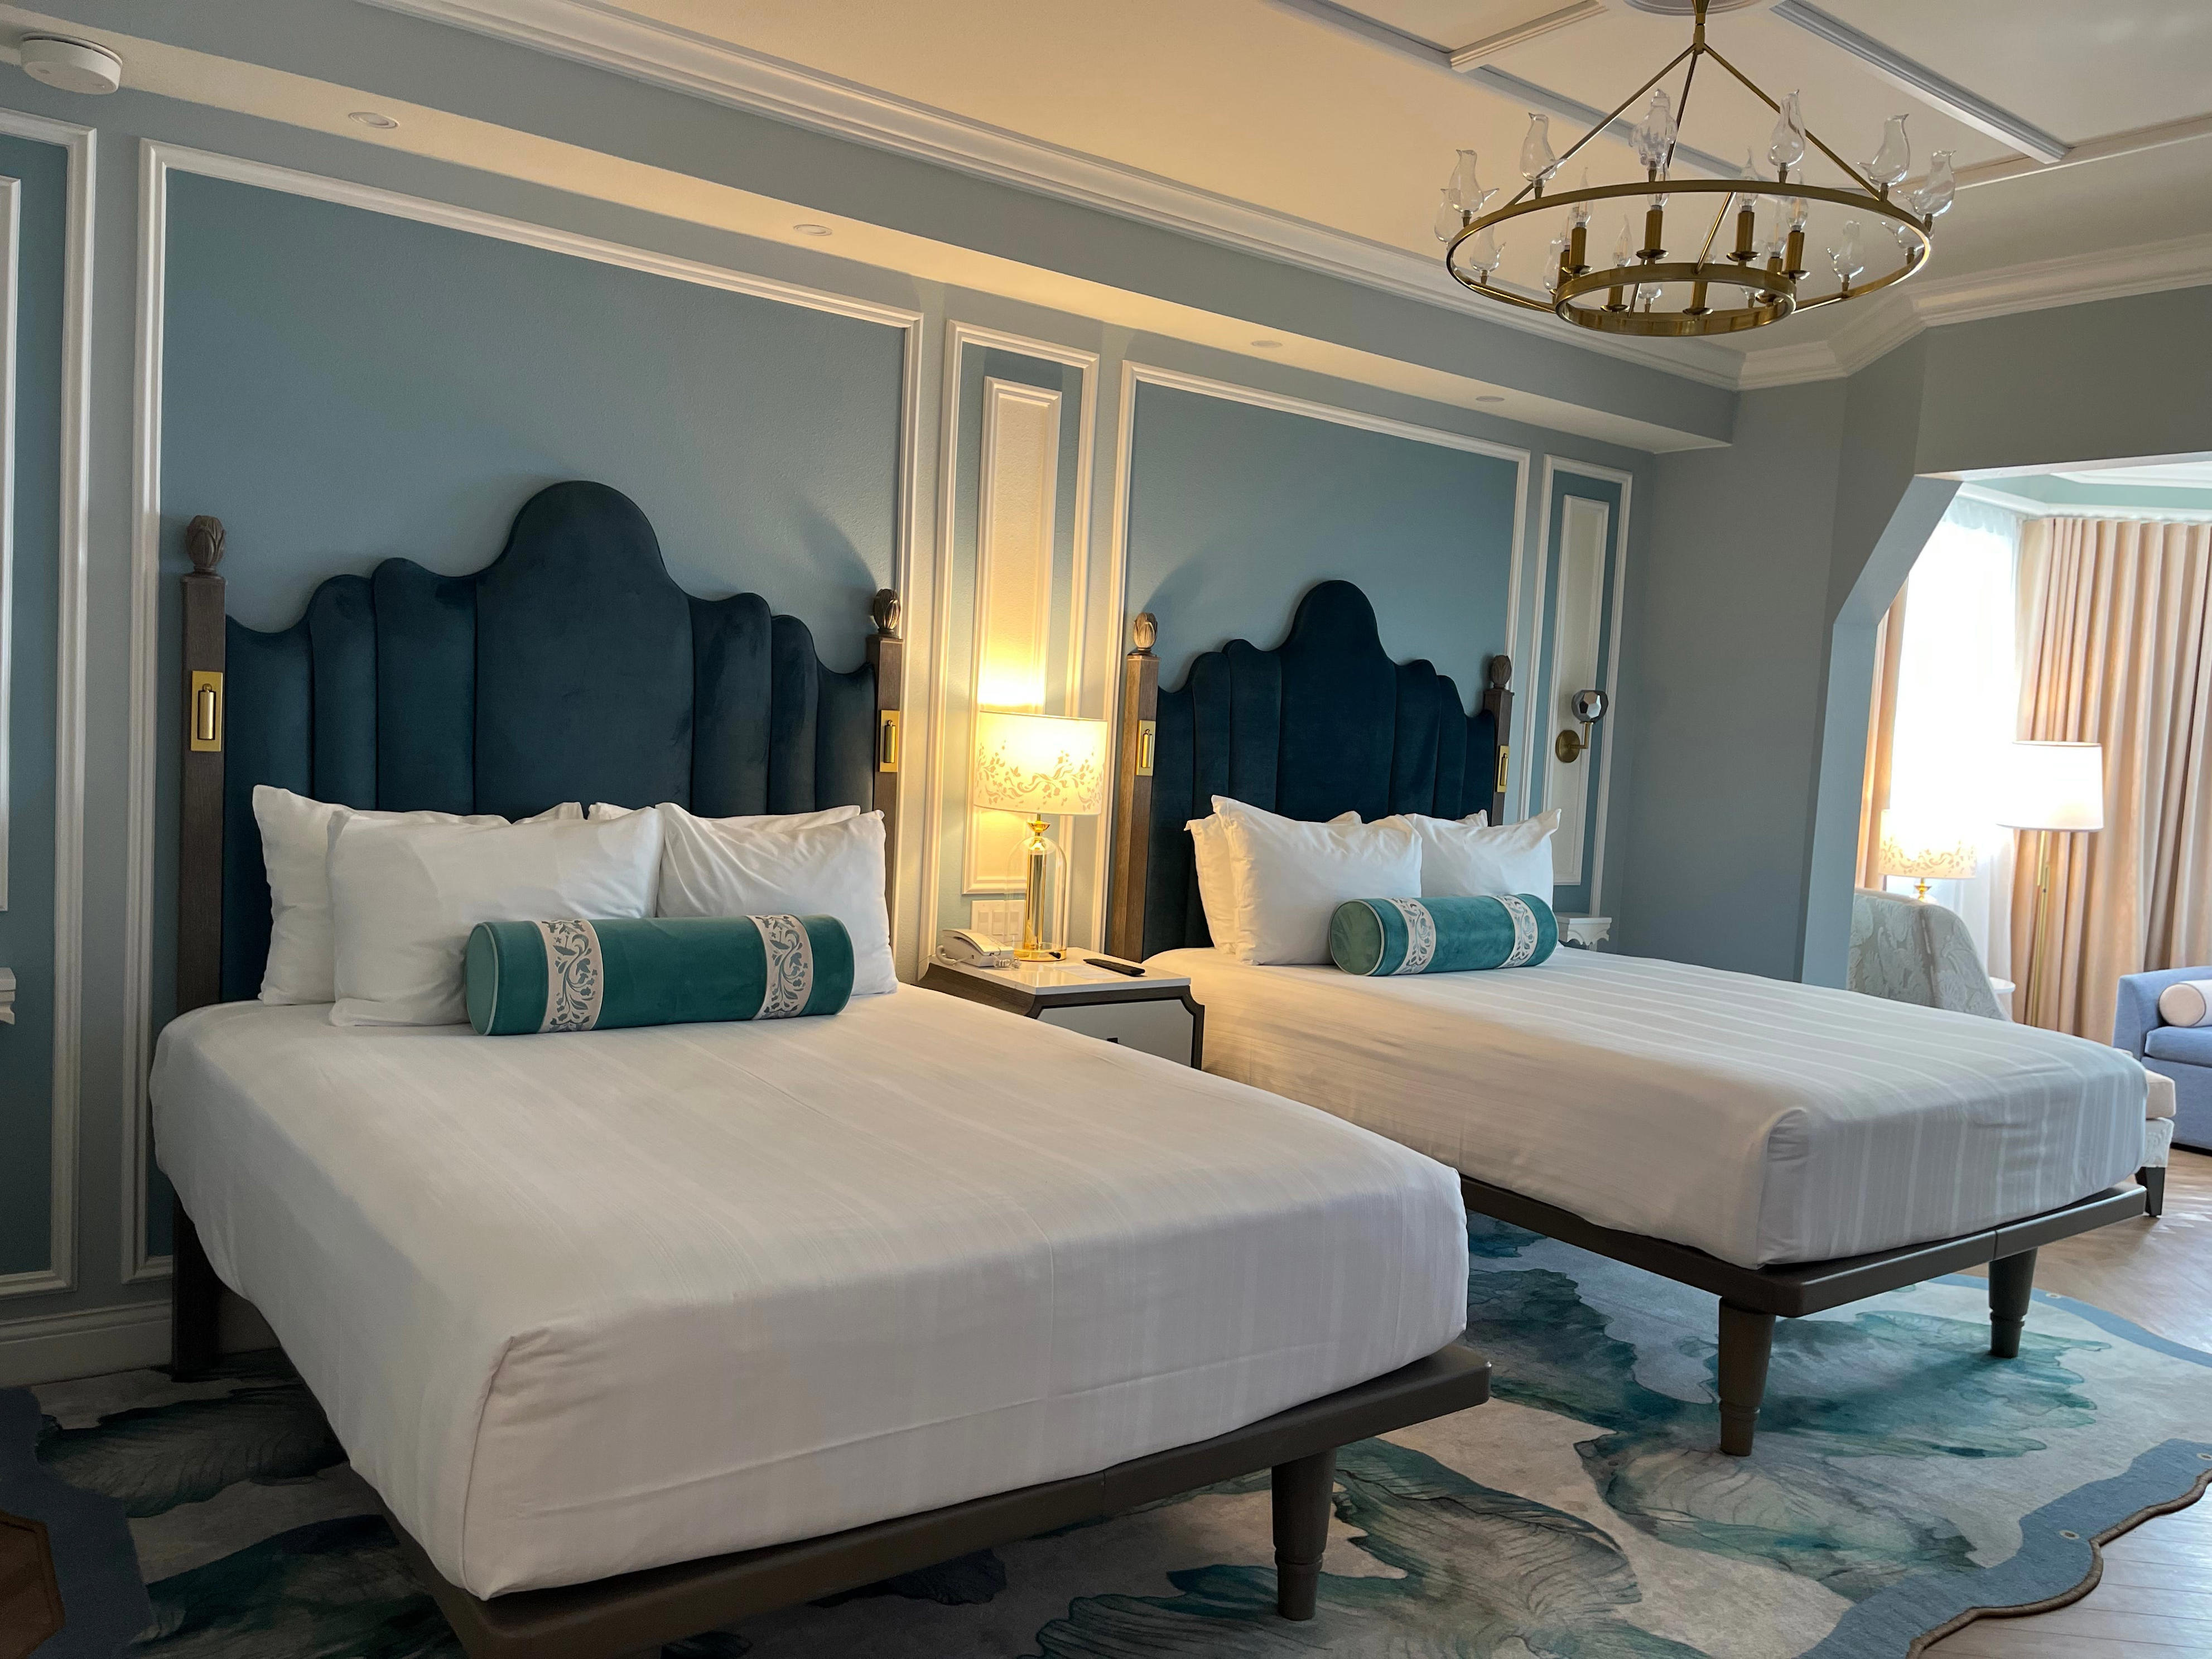 <p>For a standard room with two queen-sized beds, I couldn't believe how spacious it was.</p><p>It had two televisions which I'd never seen in a <a href="https://www.businessinsider.com/is-yacht-club-resort-worth-it-for-families-disney-world-review-2021">standard-size room at Disney</a> before.</p><p>Although it was just me and my sister staying in the room, I'd say it was large enough to comfortably fit at least four people.</p>